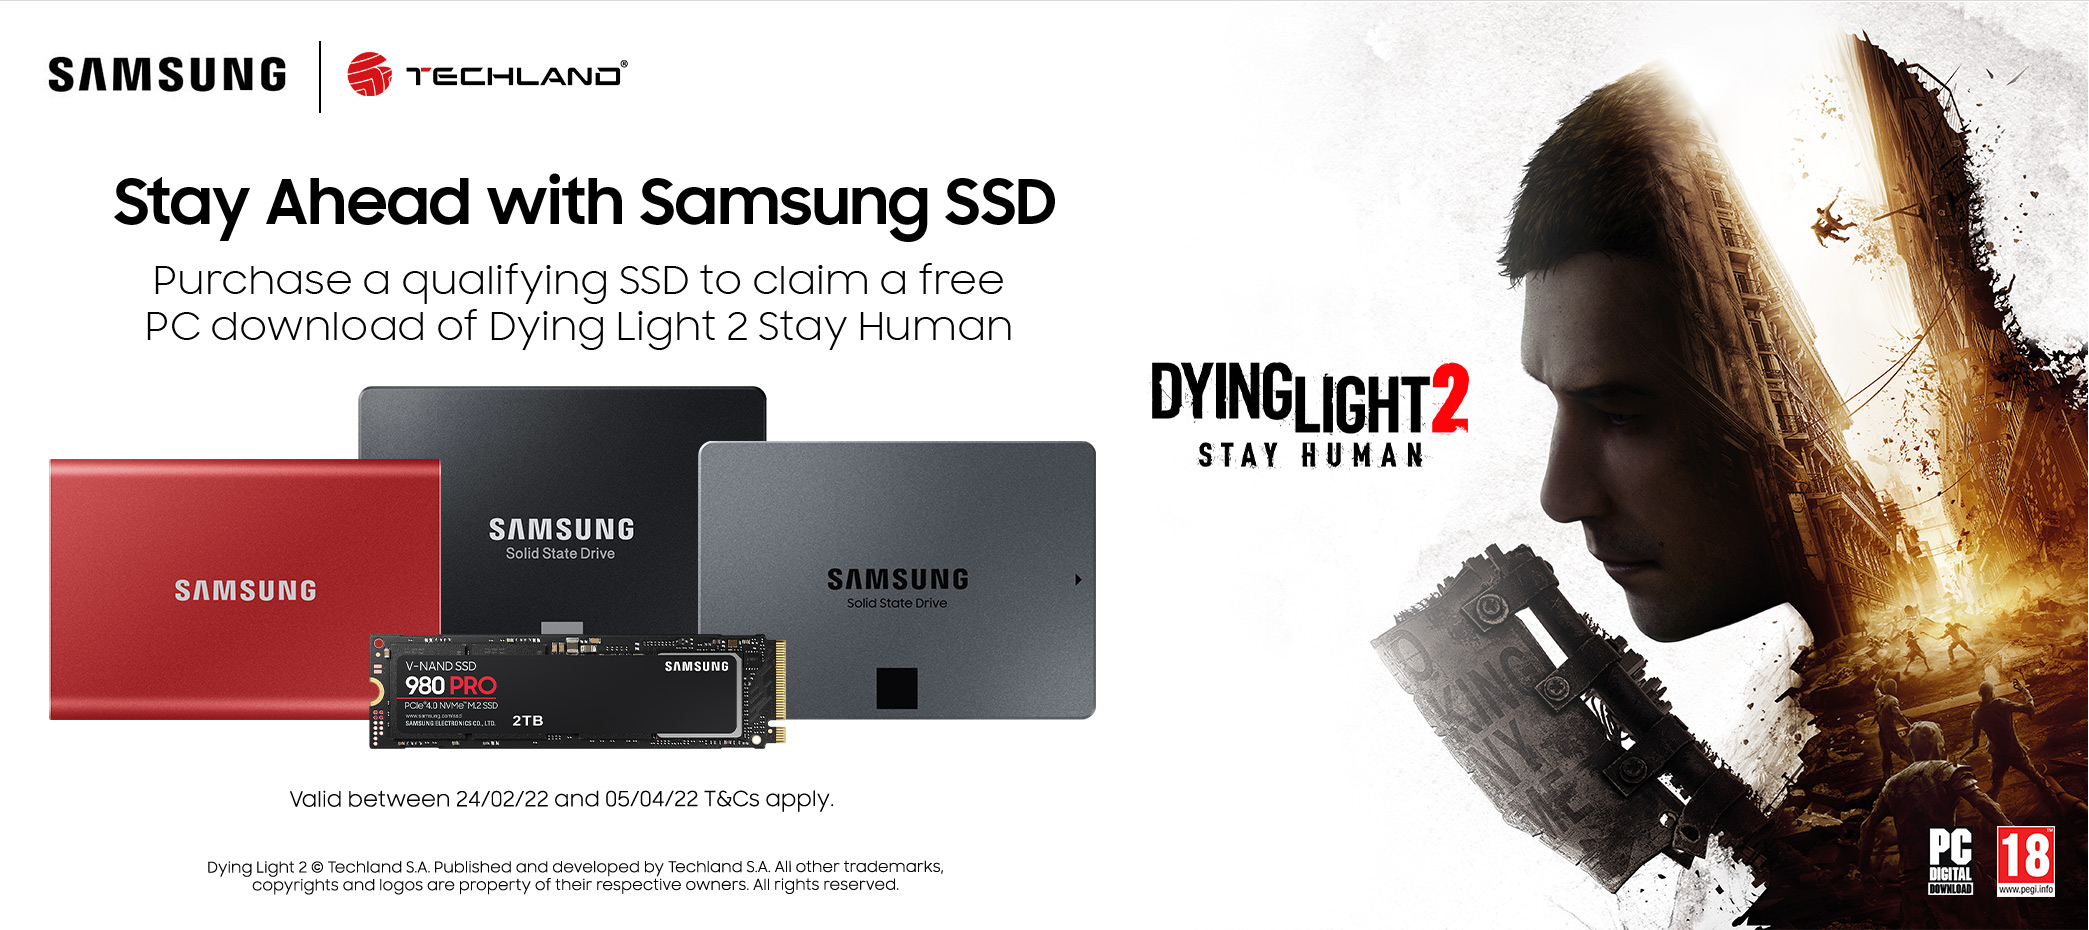 Stay ahead with Samsung SSD